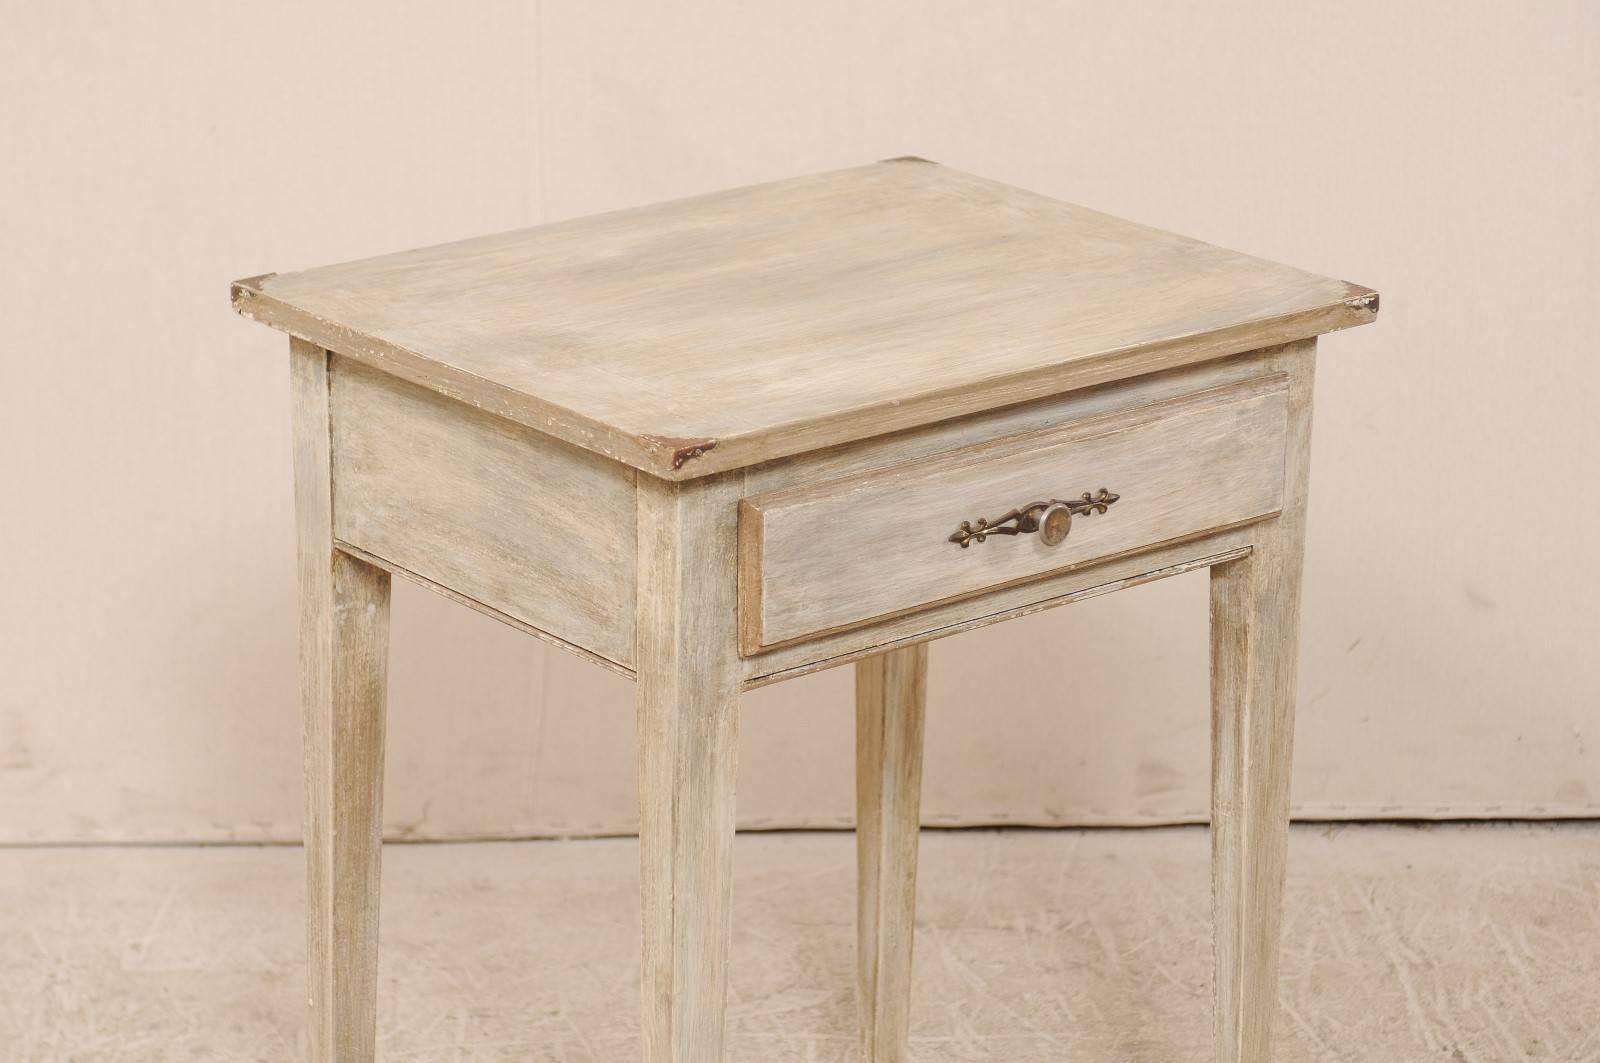 Carved Mid-20th Century Single Drawer Petite Accent Table with Elegant Brass Hardware